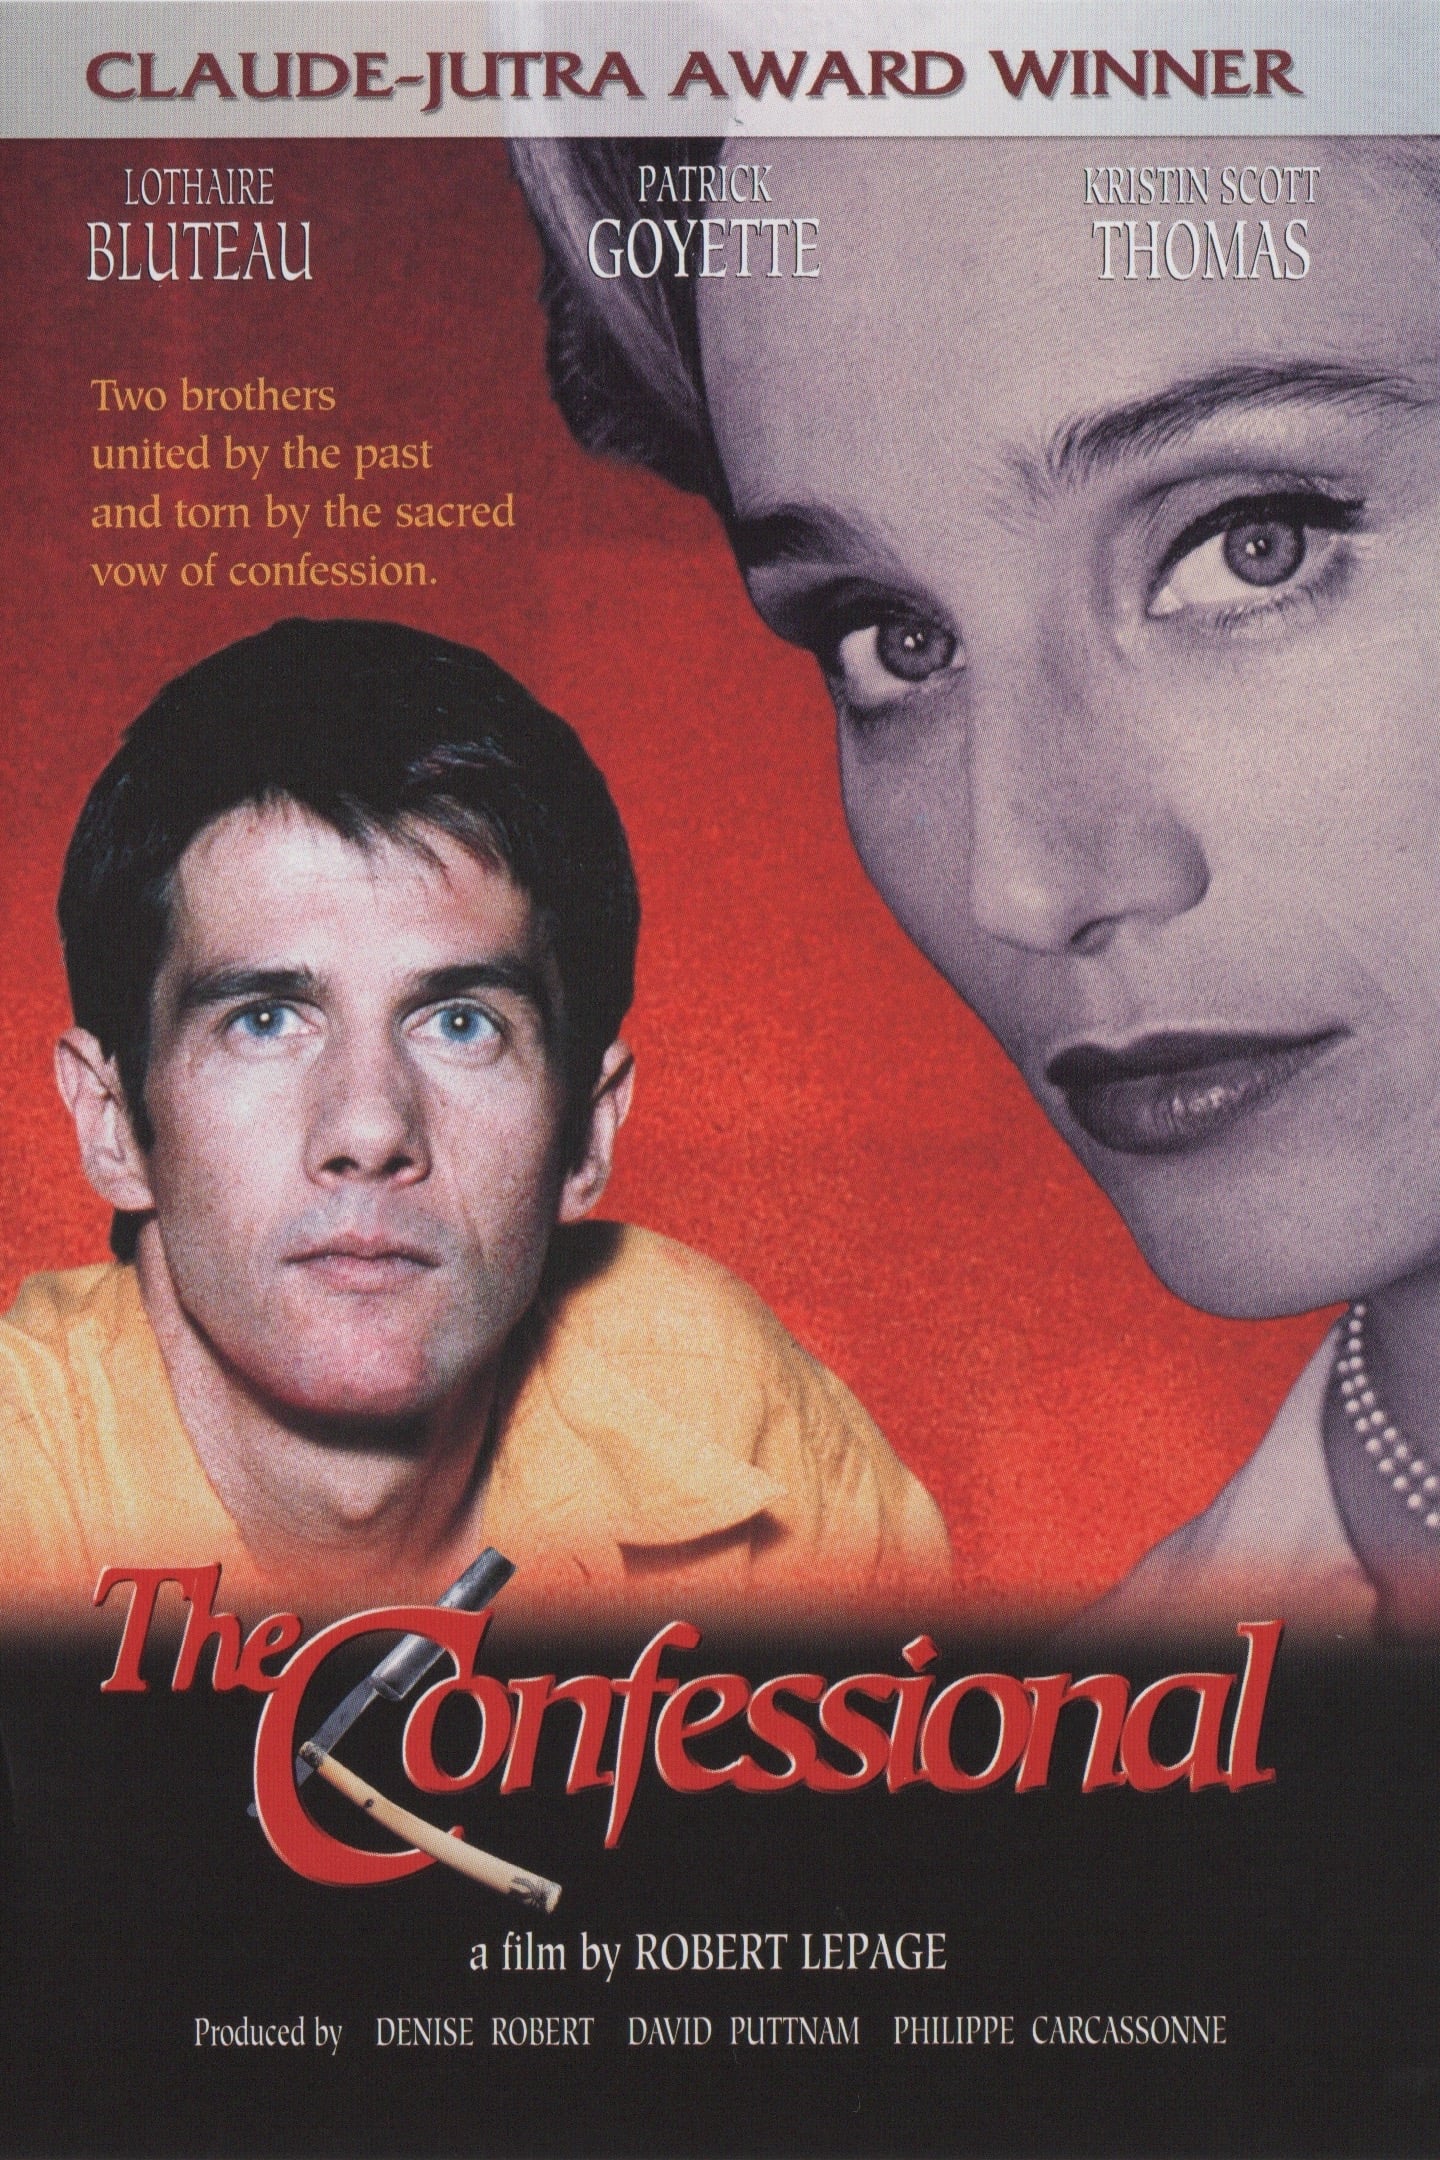 The Confessional (1995)